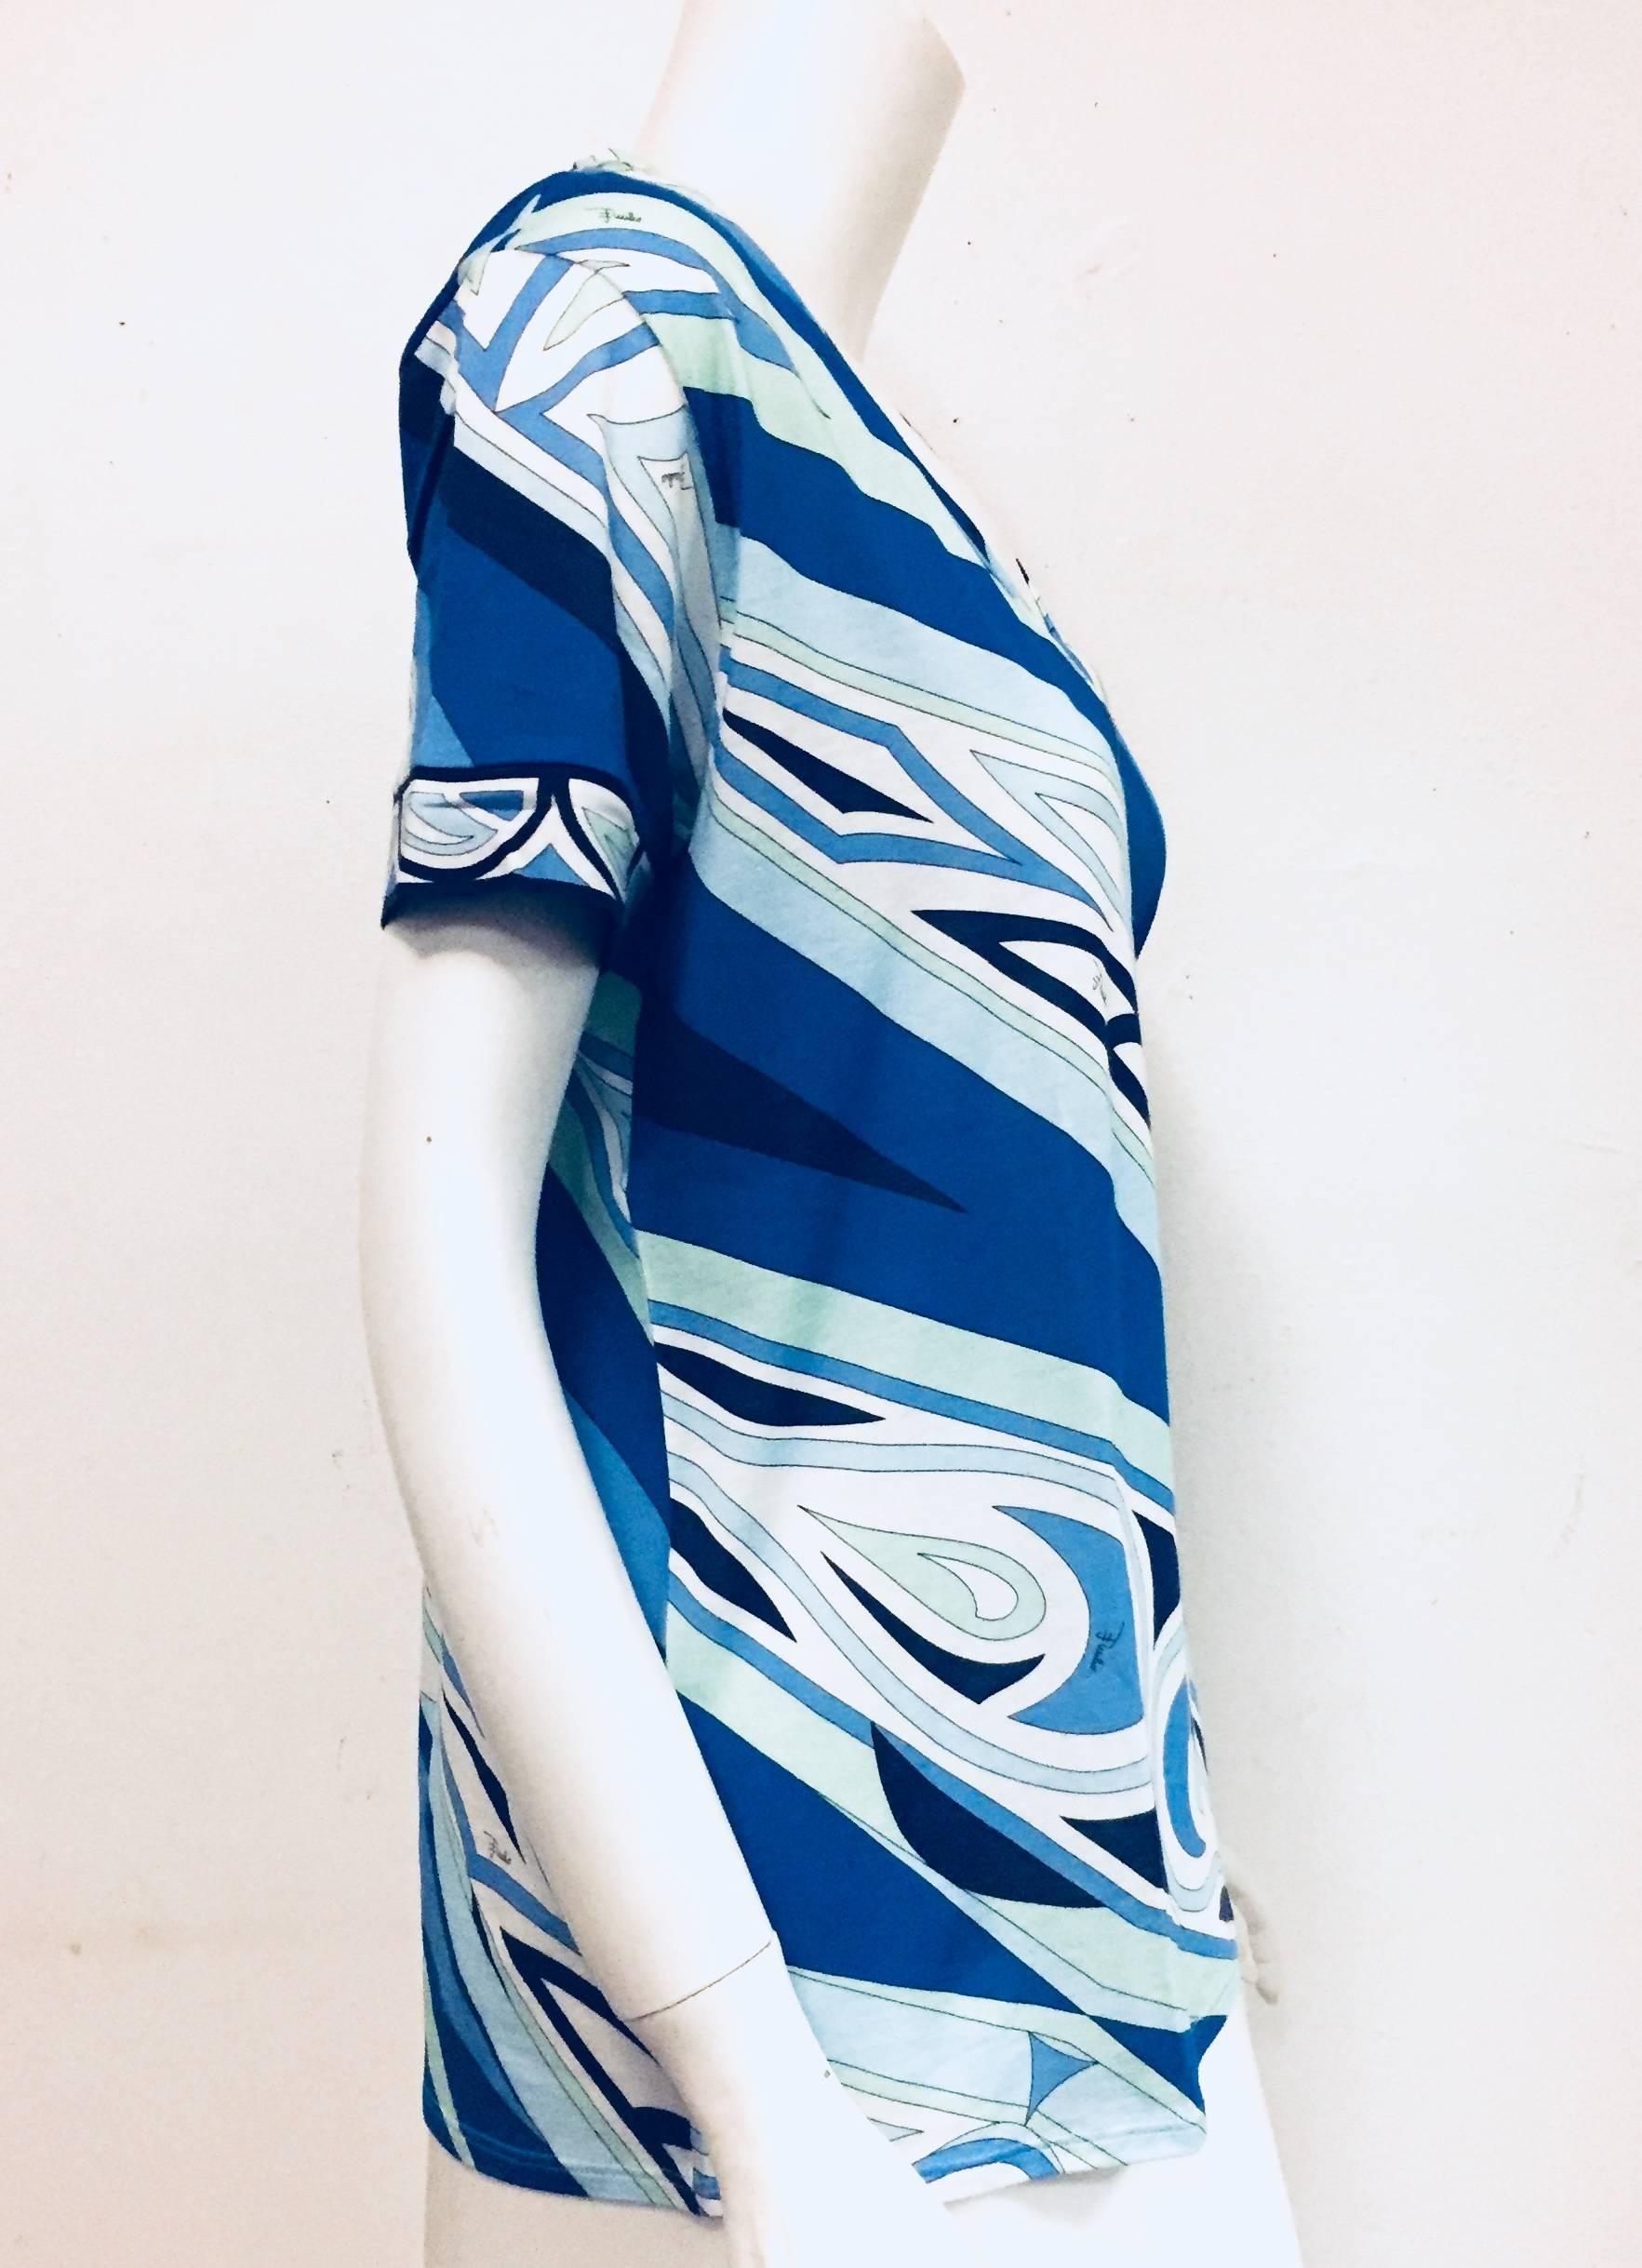 Emilio Pucci's mastery of color in tones of blue and print is evident on this vibrant top. Crafted in Italy from lightweight cotton.  The V neck and short sleeves of this casual Pucci top will combine fabulously with a pair of distressed jeans or